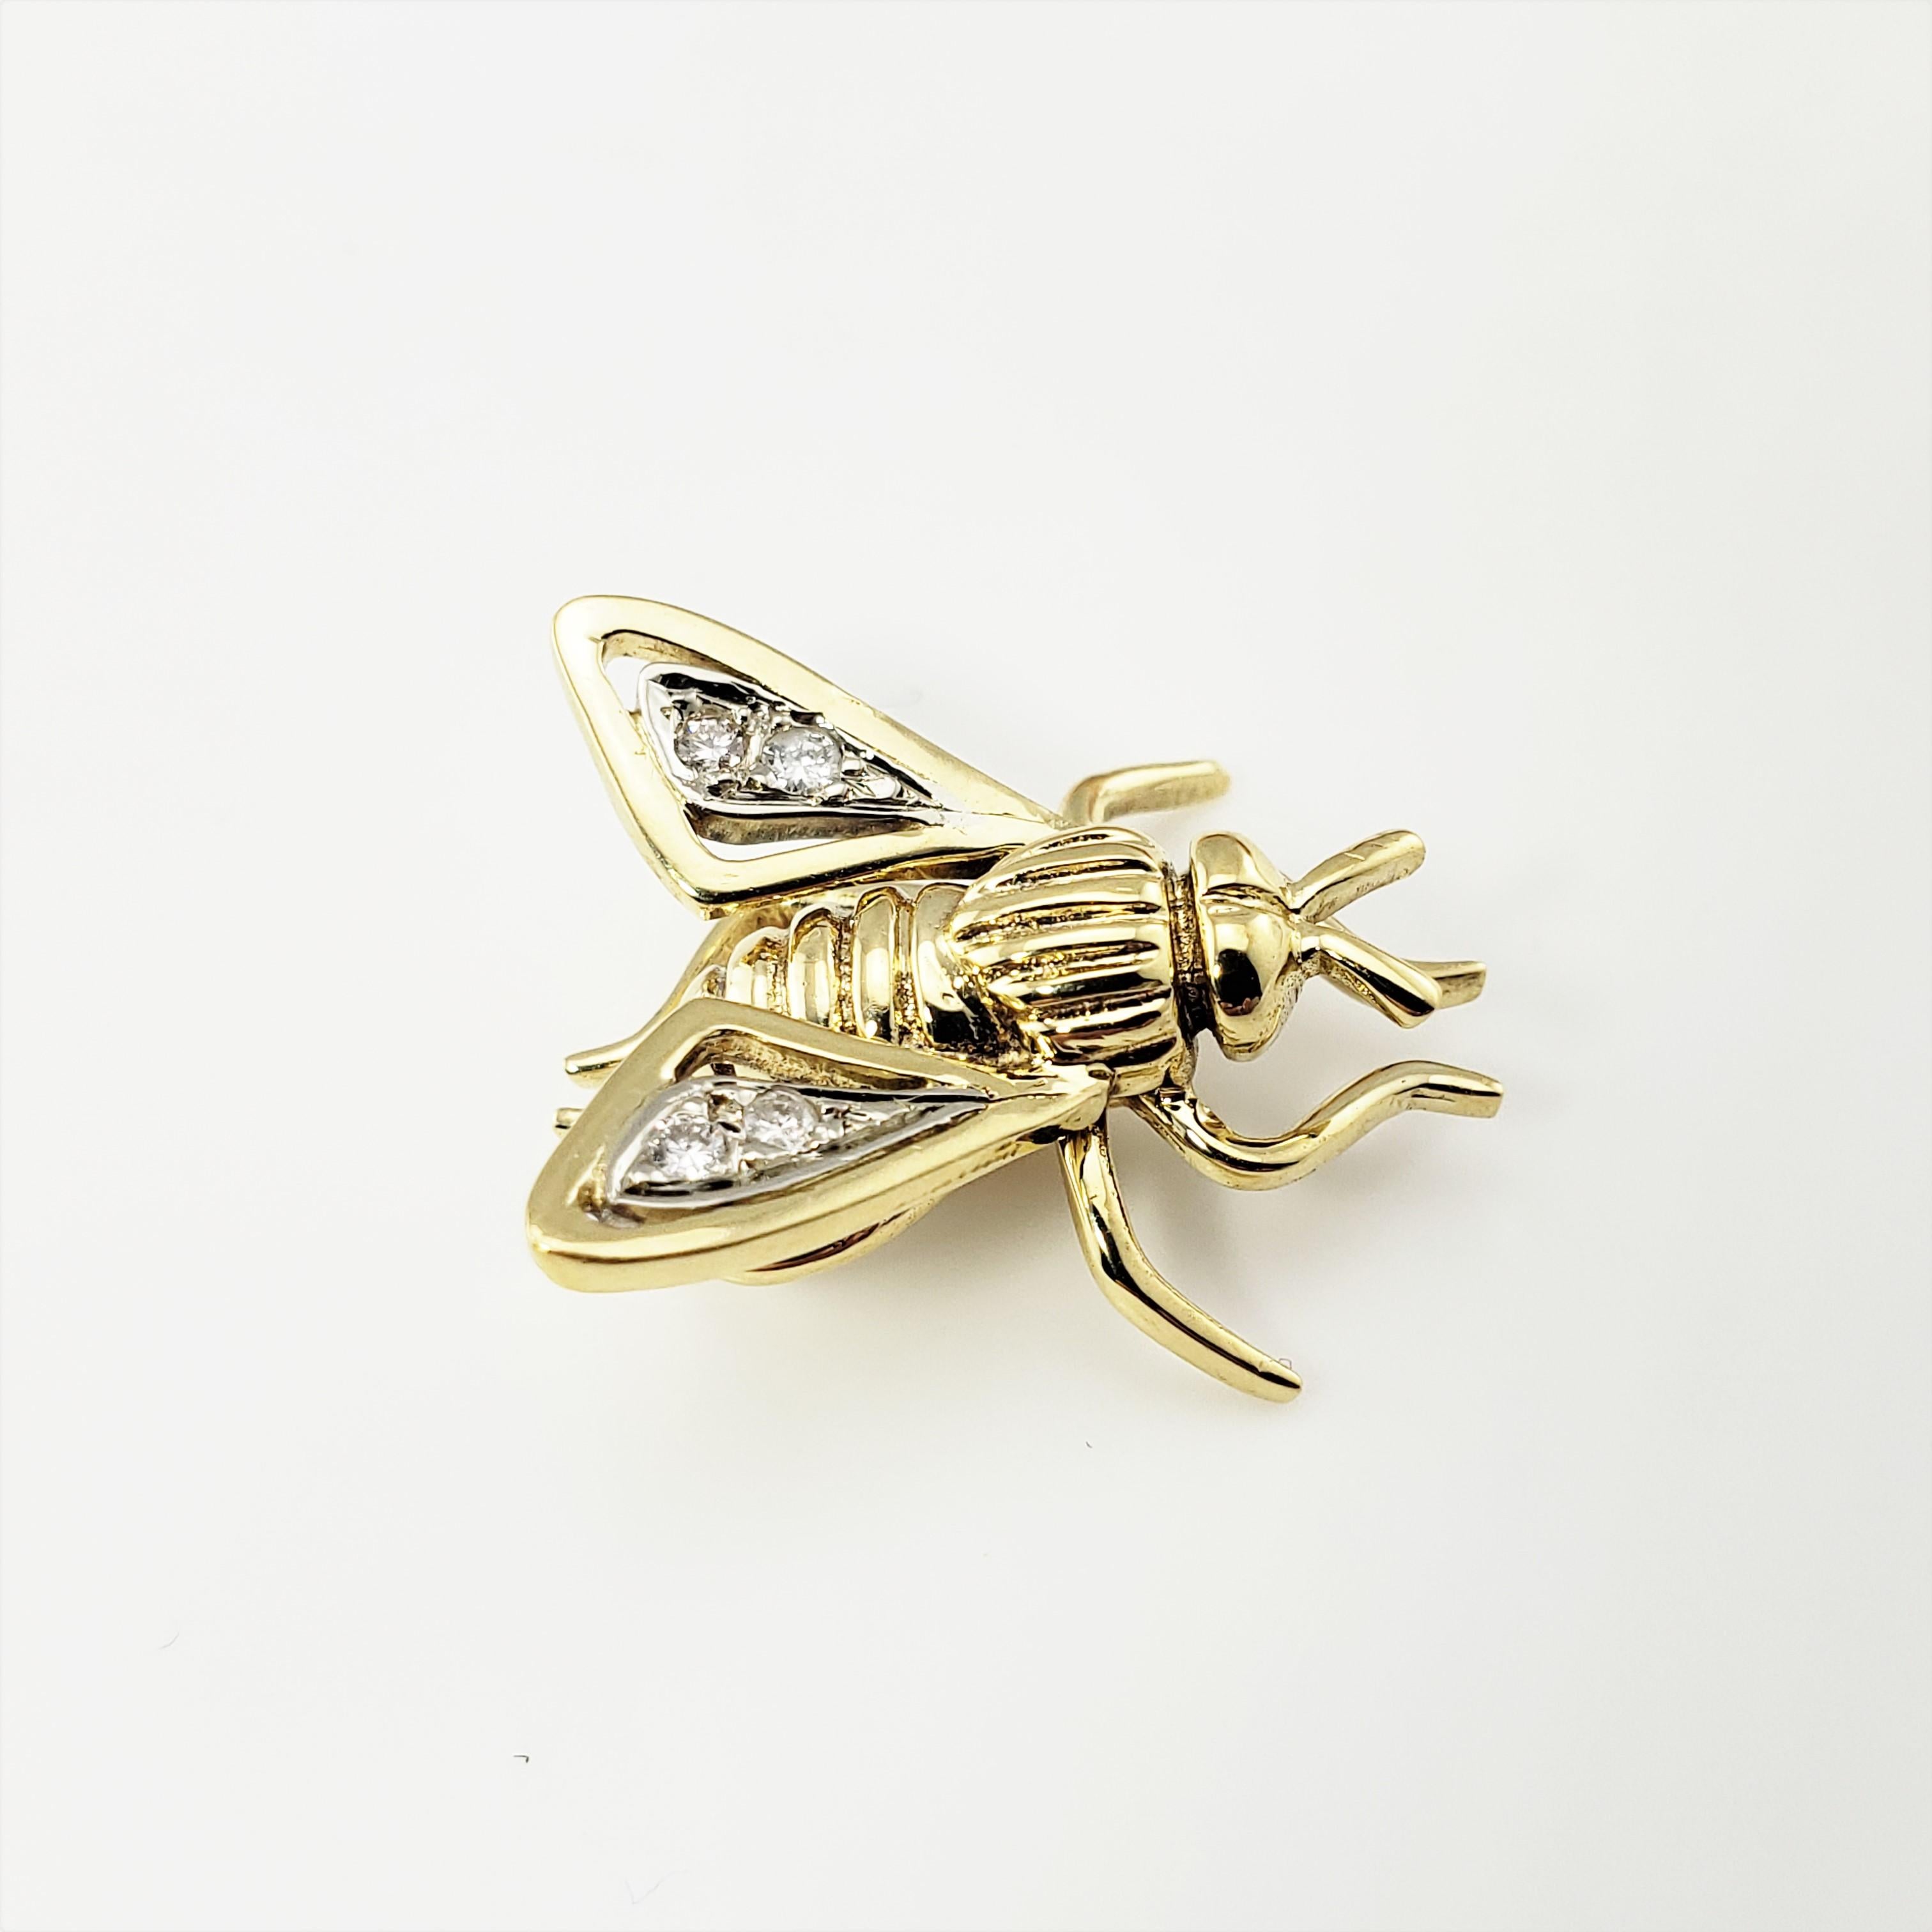 18 Karat Yellow Gold and Diamond Fly Pin/Brooch-

This lovely 3D brooch features a beautifully detailed fly accented with four round brilliant cut diamonds set in 18K yellow gold.

Approximate total diamond weight:  .04 ct.

Diamond color: 